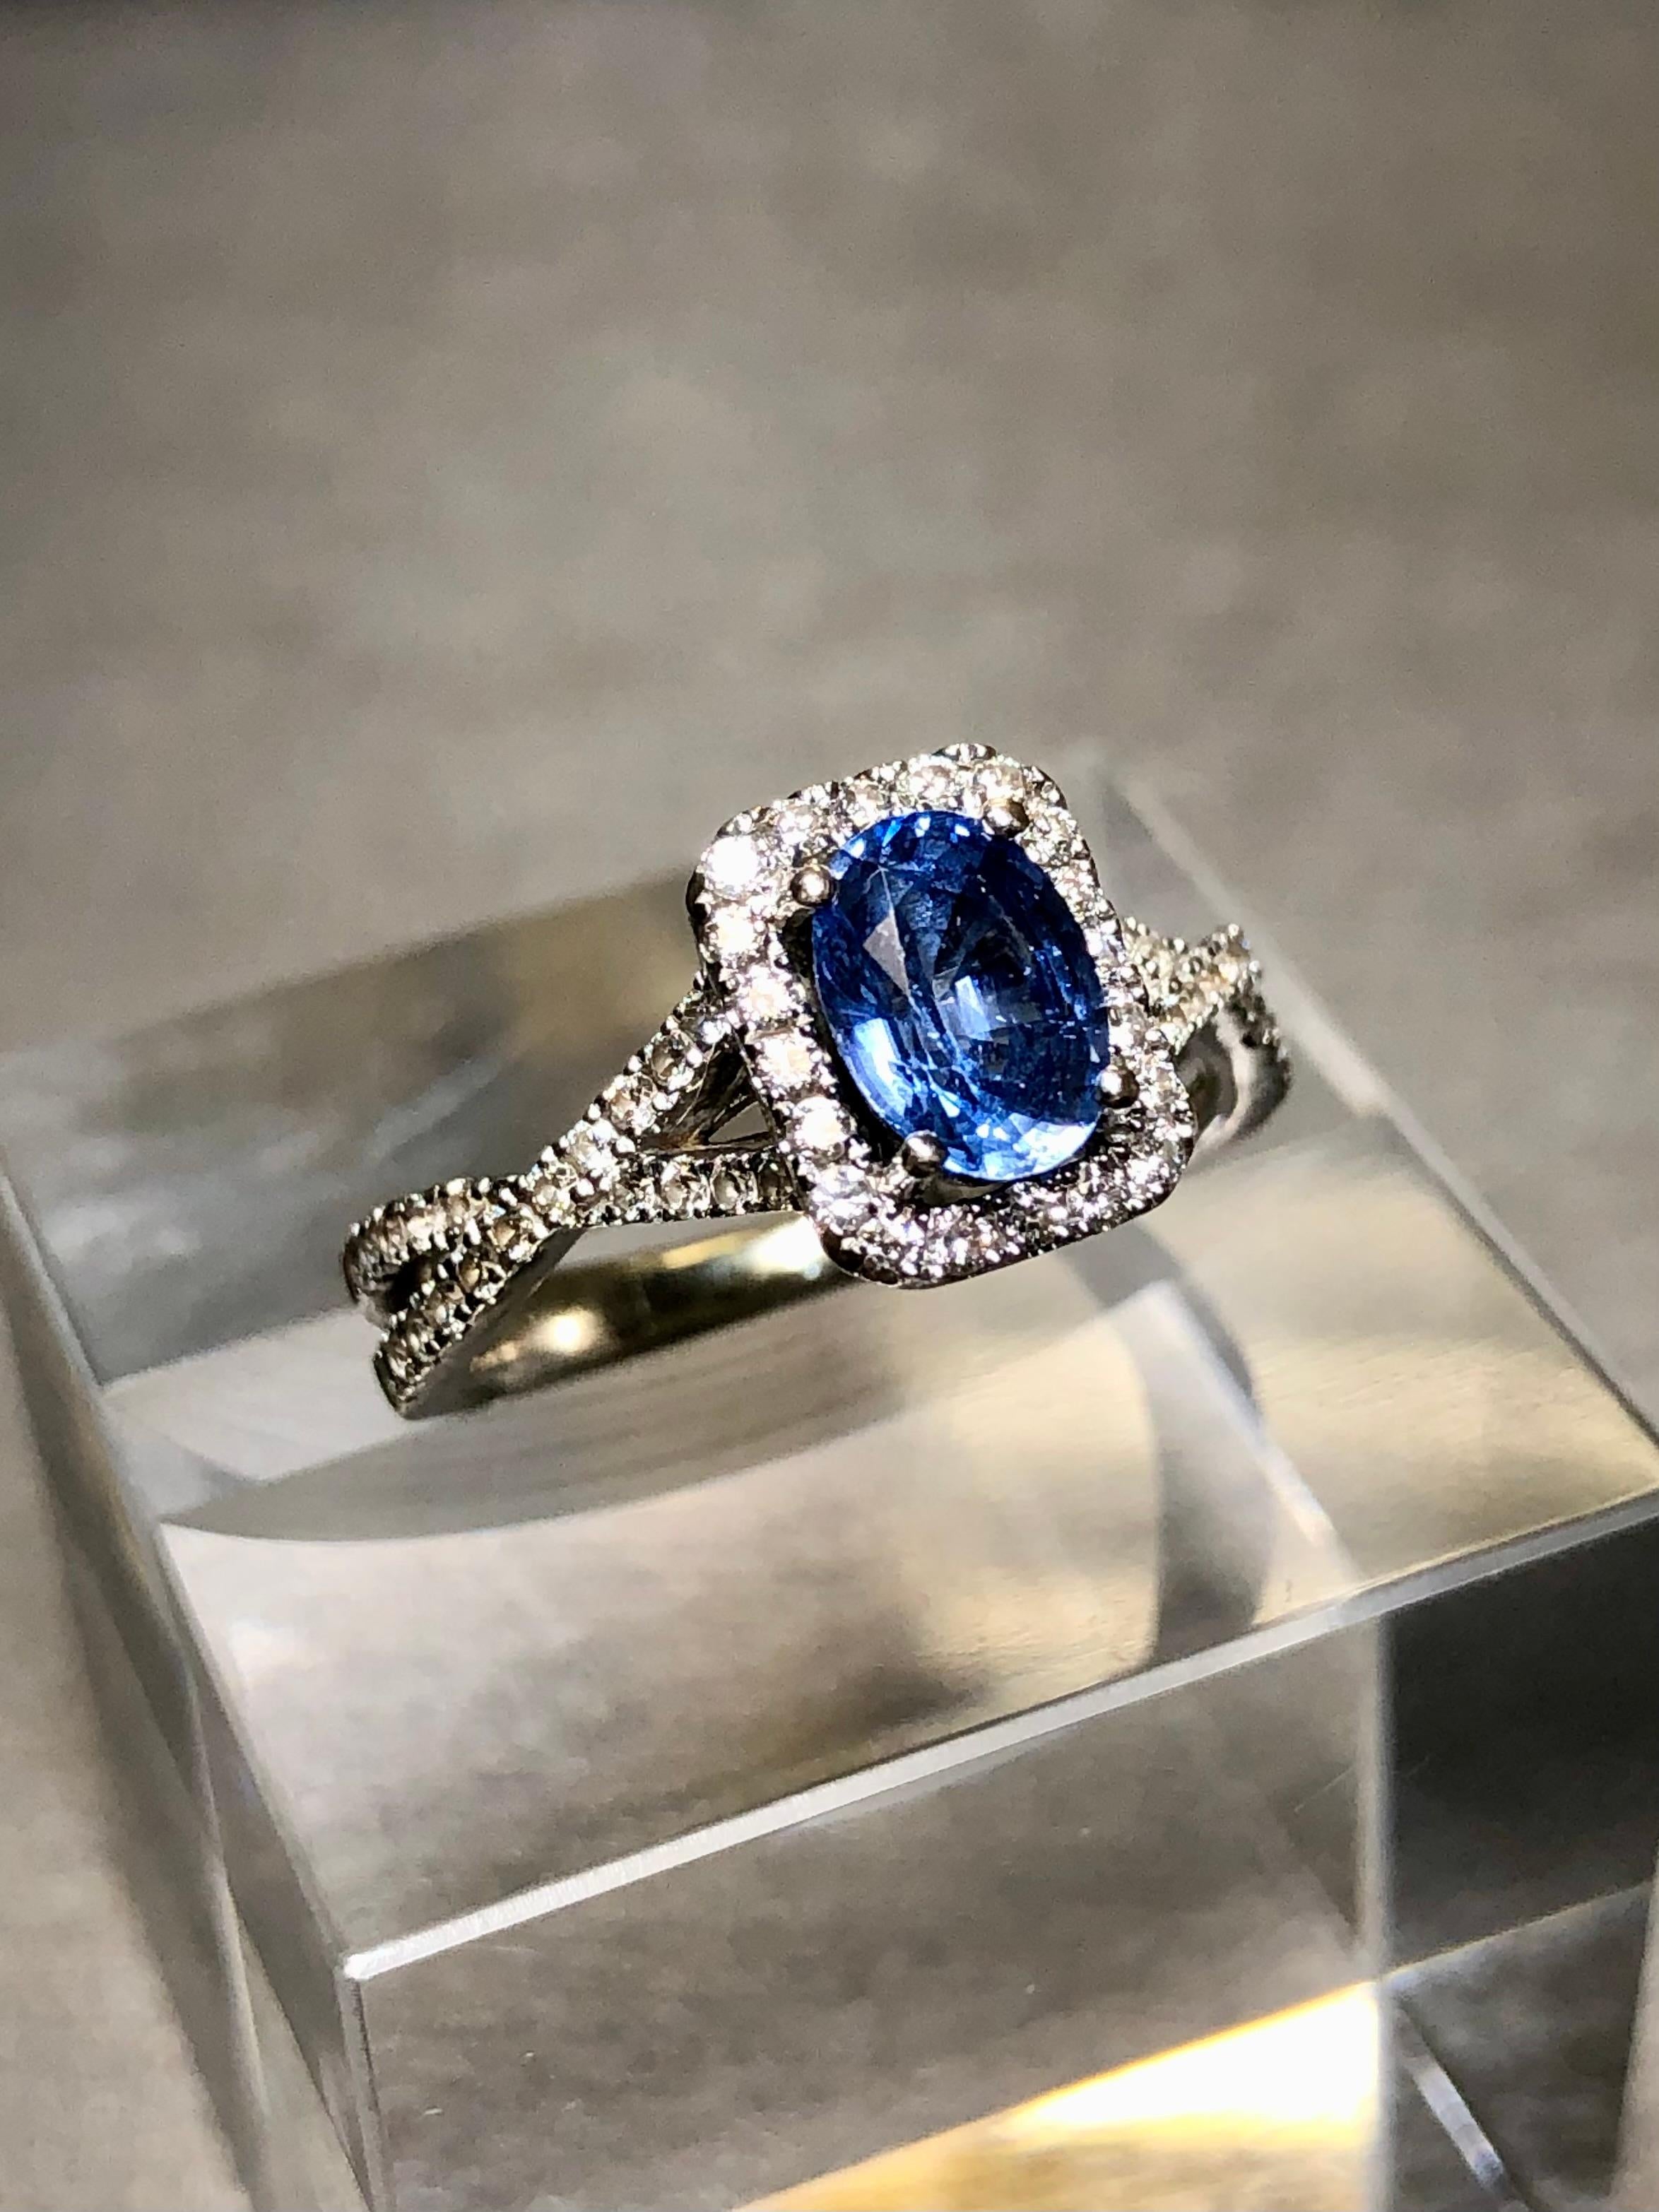 An elegant solitaire ring done in 14K white gold centered by a gorgeous cornflower blue natural oval cut sapphire weighing approximately 1ct. Bead set down the sides is approximately .60cttw in H-J color Vs2-Si1 clarity round